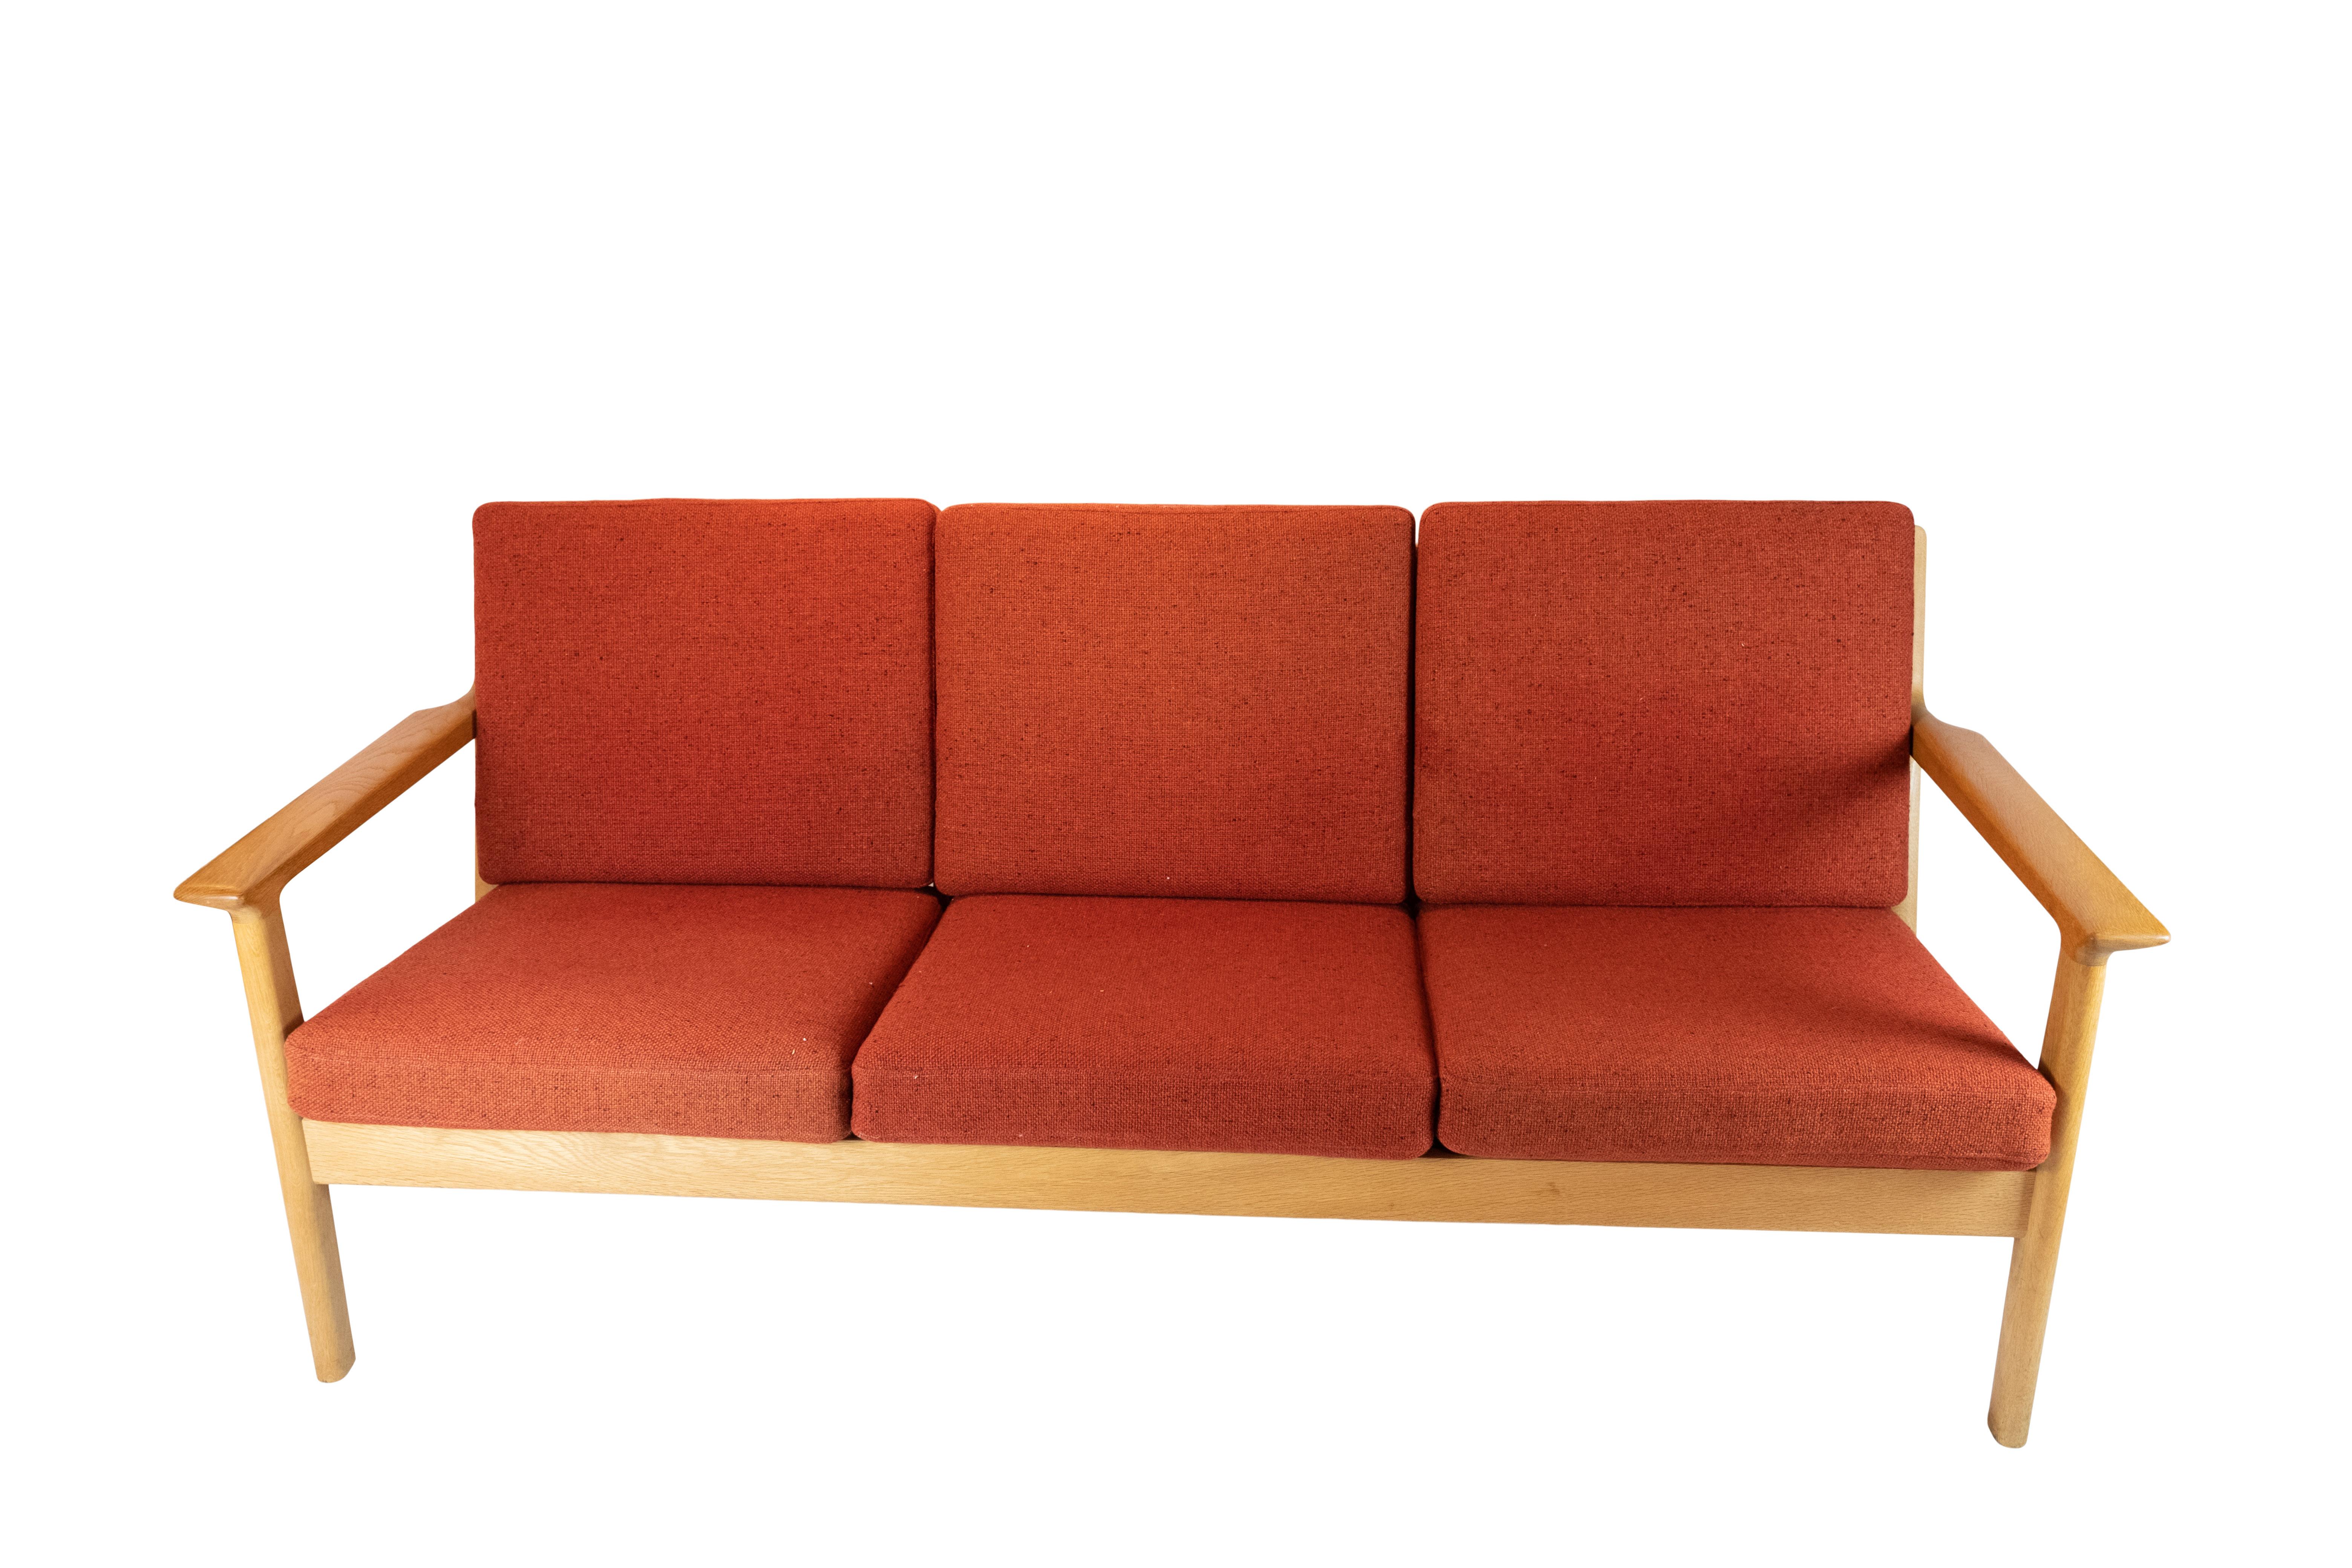 This three-seat sofa, a masterpiece of Danish design by the iconic Hans J. Wegner, epitomizes both elegance and comfort. Crafted from solid oak and upholstered in vibrant red wool fabric, it seamlessly blends timeless style with superior